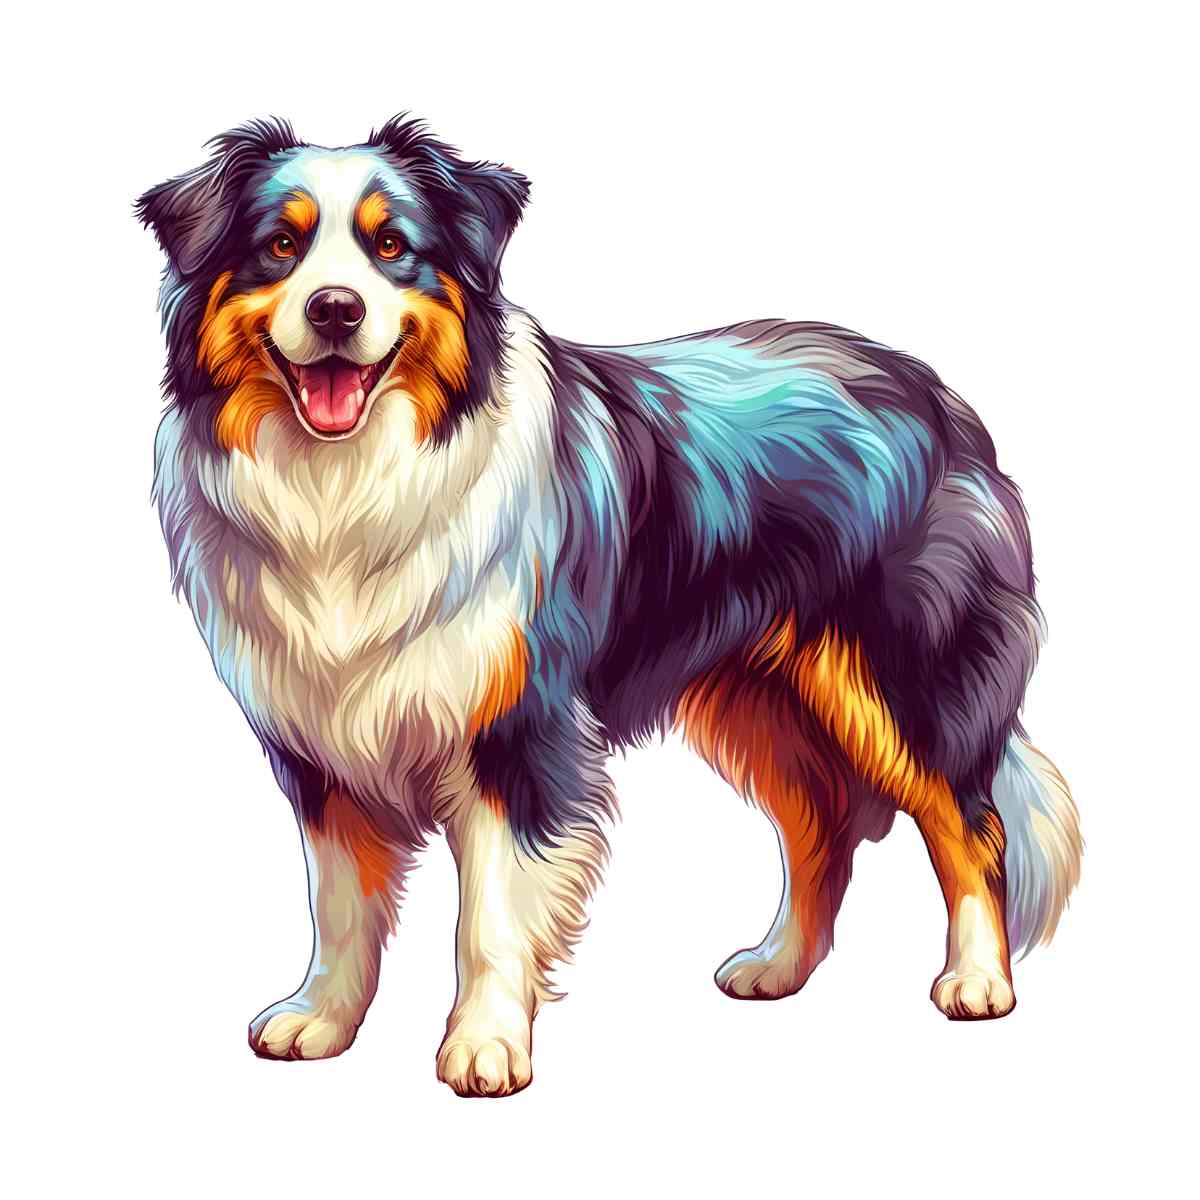 Animal Jigsaw Puzzle > Wooden Jigsaw Puzzle > Jigsaw Puzzle A4 Australian Shepherd Dog - Jigsaw Puzzle